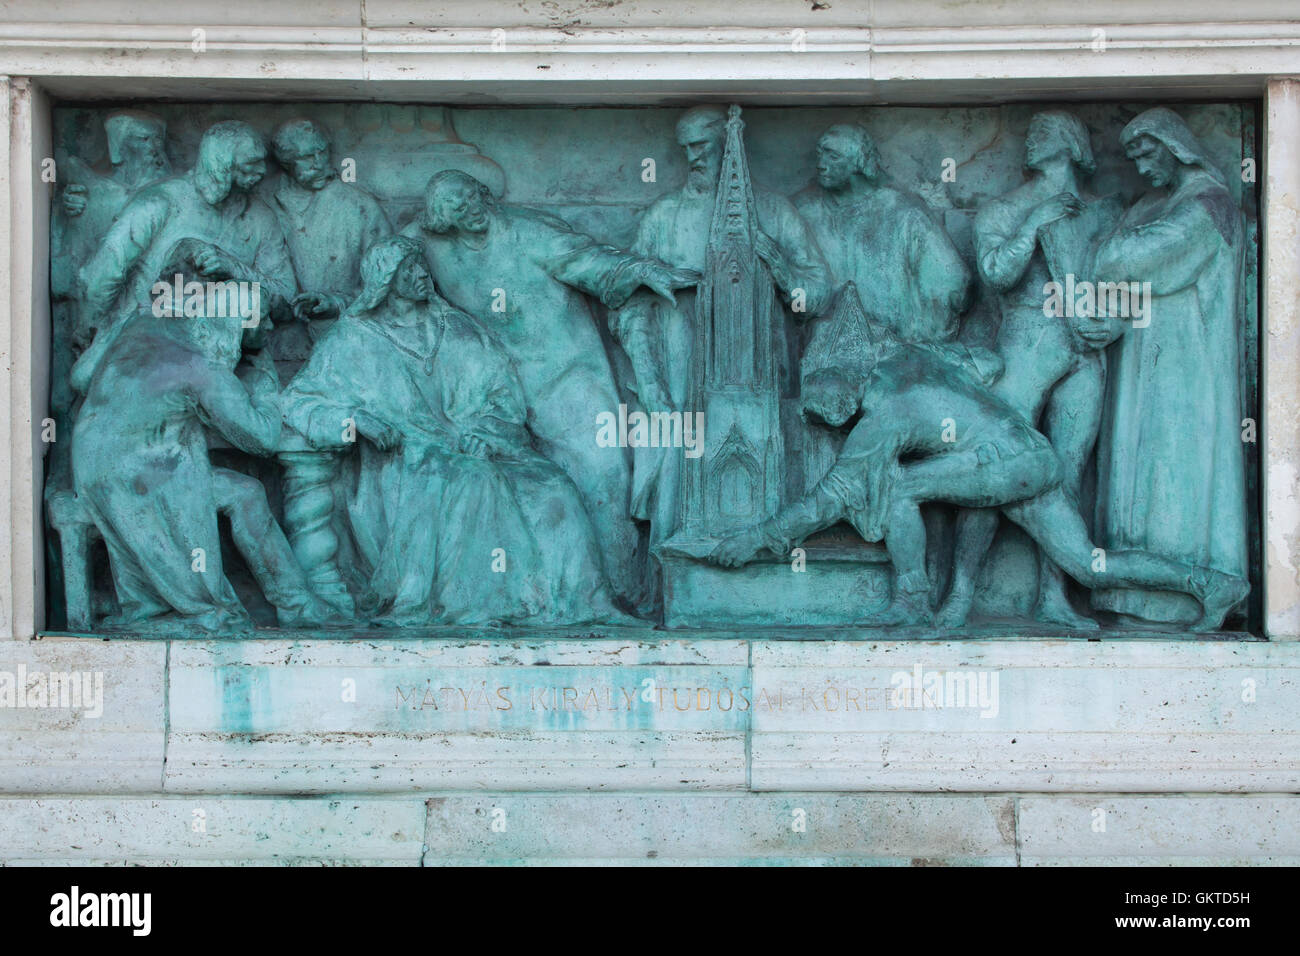 King Matthias Corvinus with his scholars. Bronze relief by Hungarian sculptor Gyorgy Zala on the Millennium Monument in the Heroes Square in Budapest, Hungary. Stock Photo